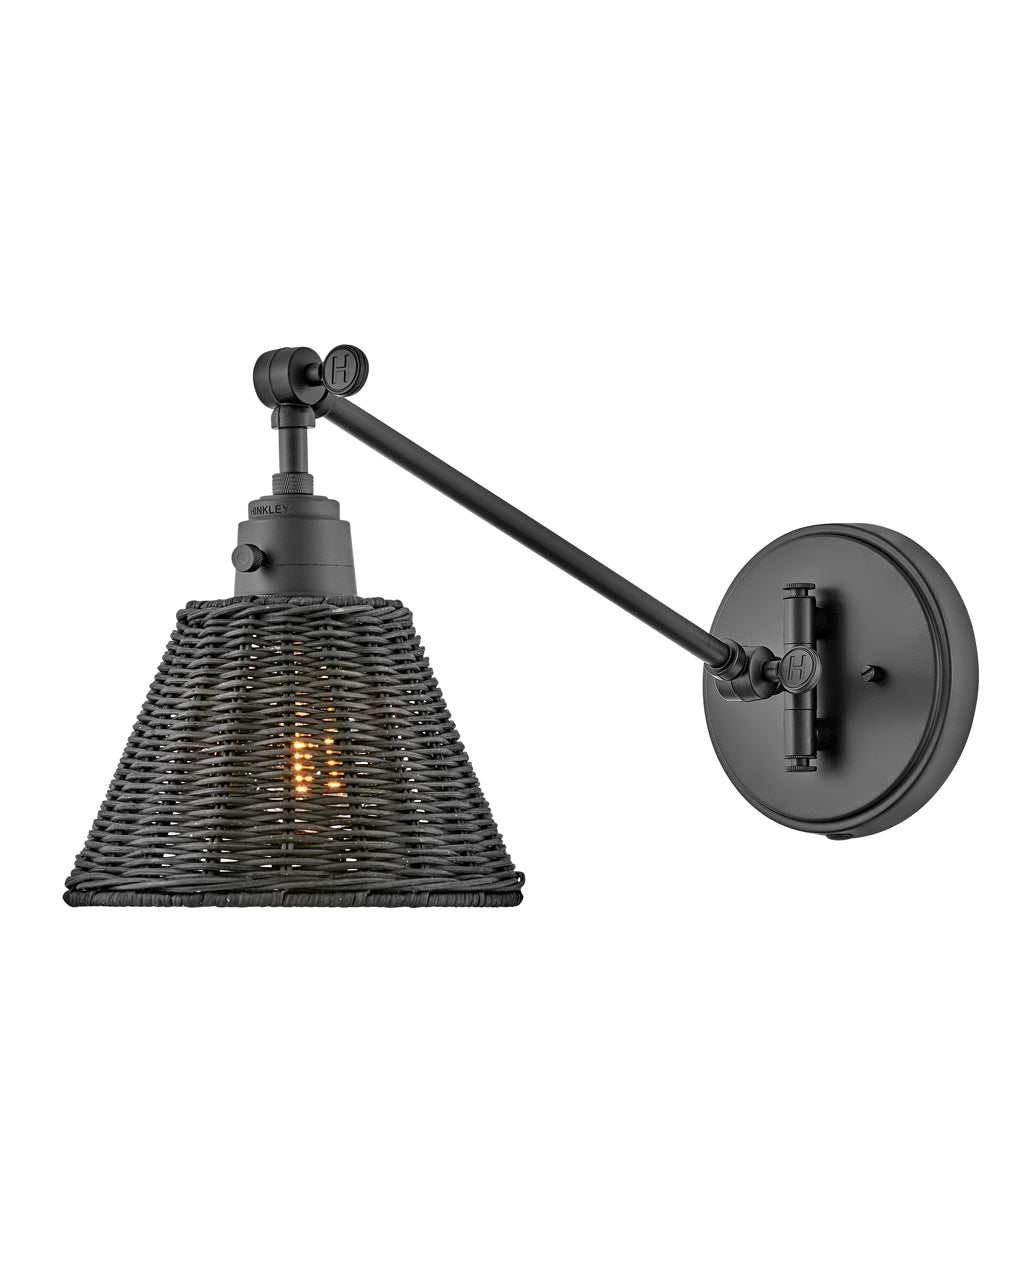 Hinkley Arti Sconce Sconce Hinkley Black with Black Natural Rattan Shade 19.0x7.75x10.25 